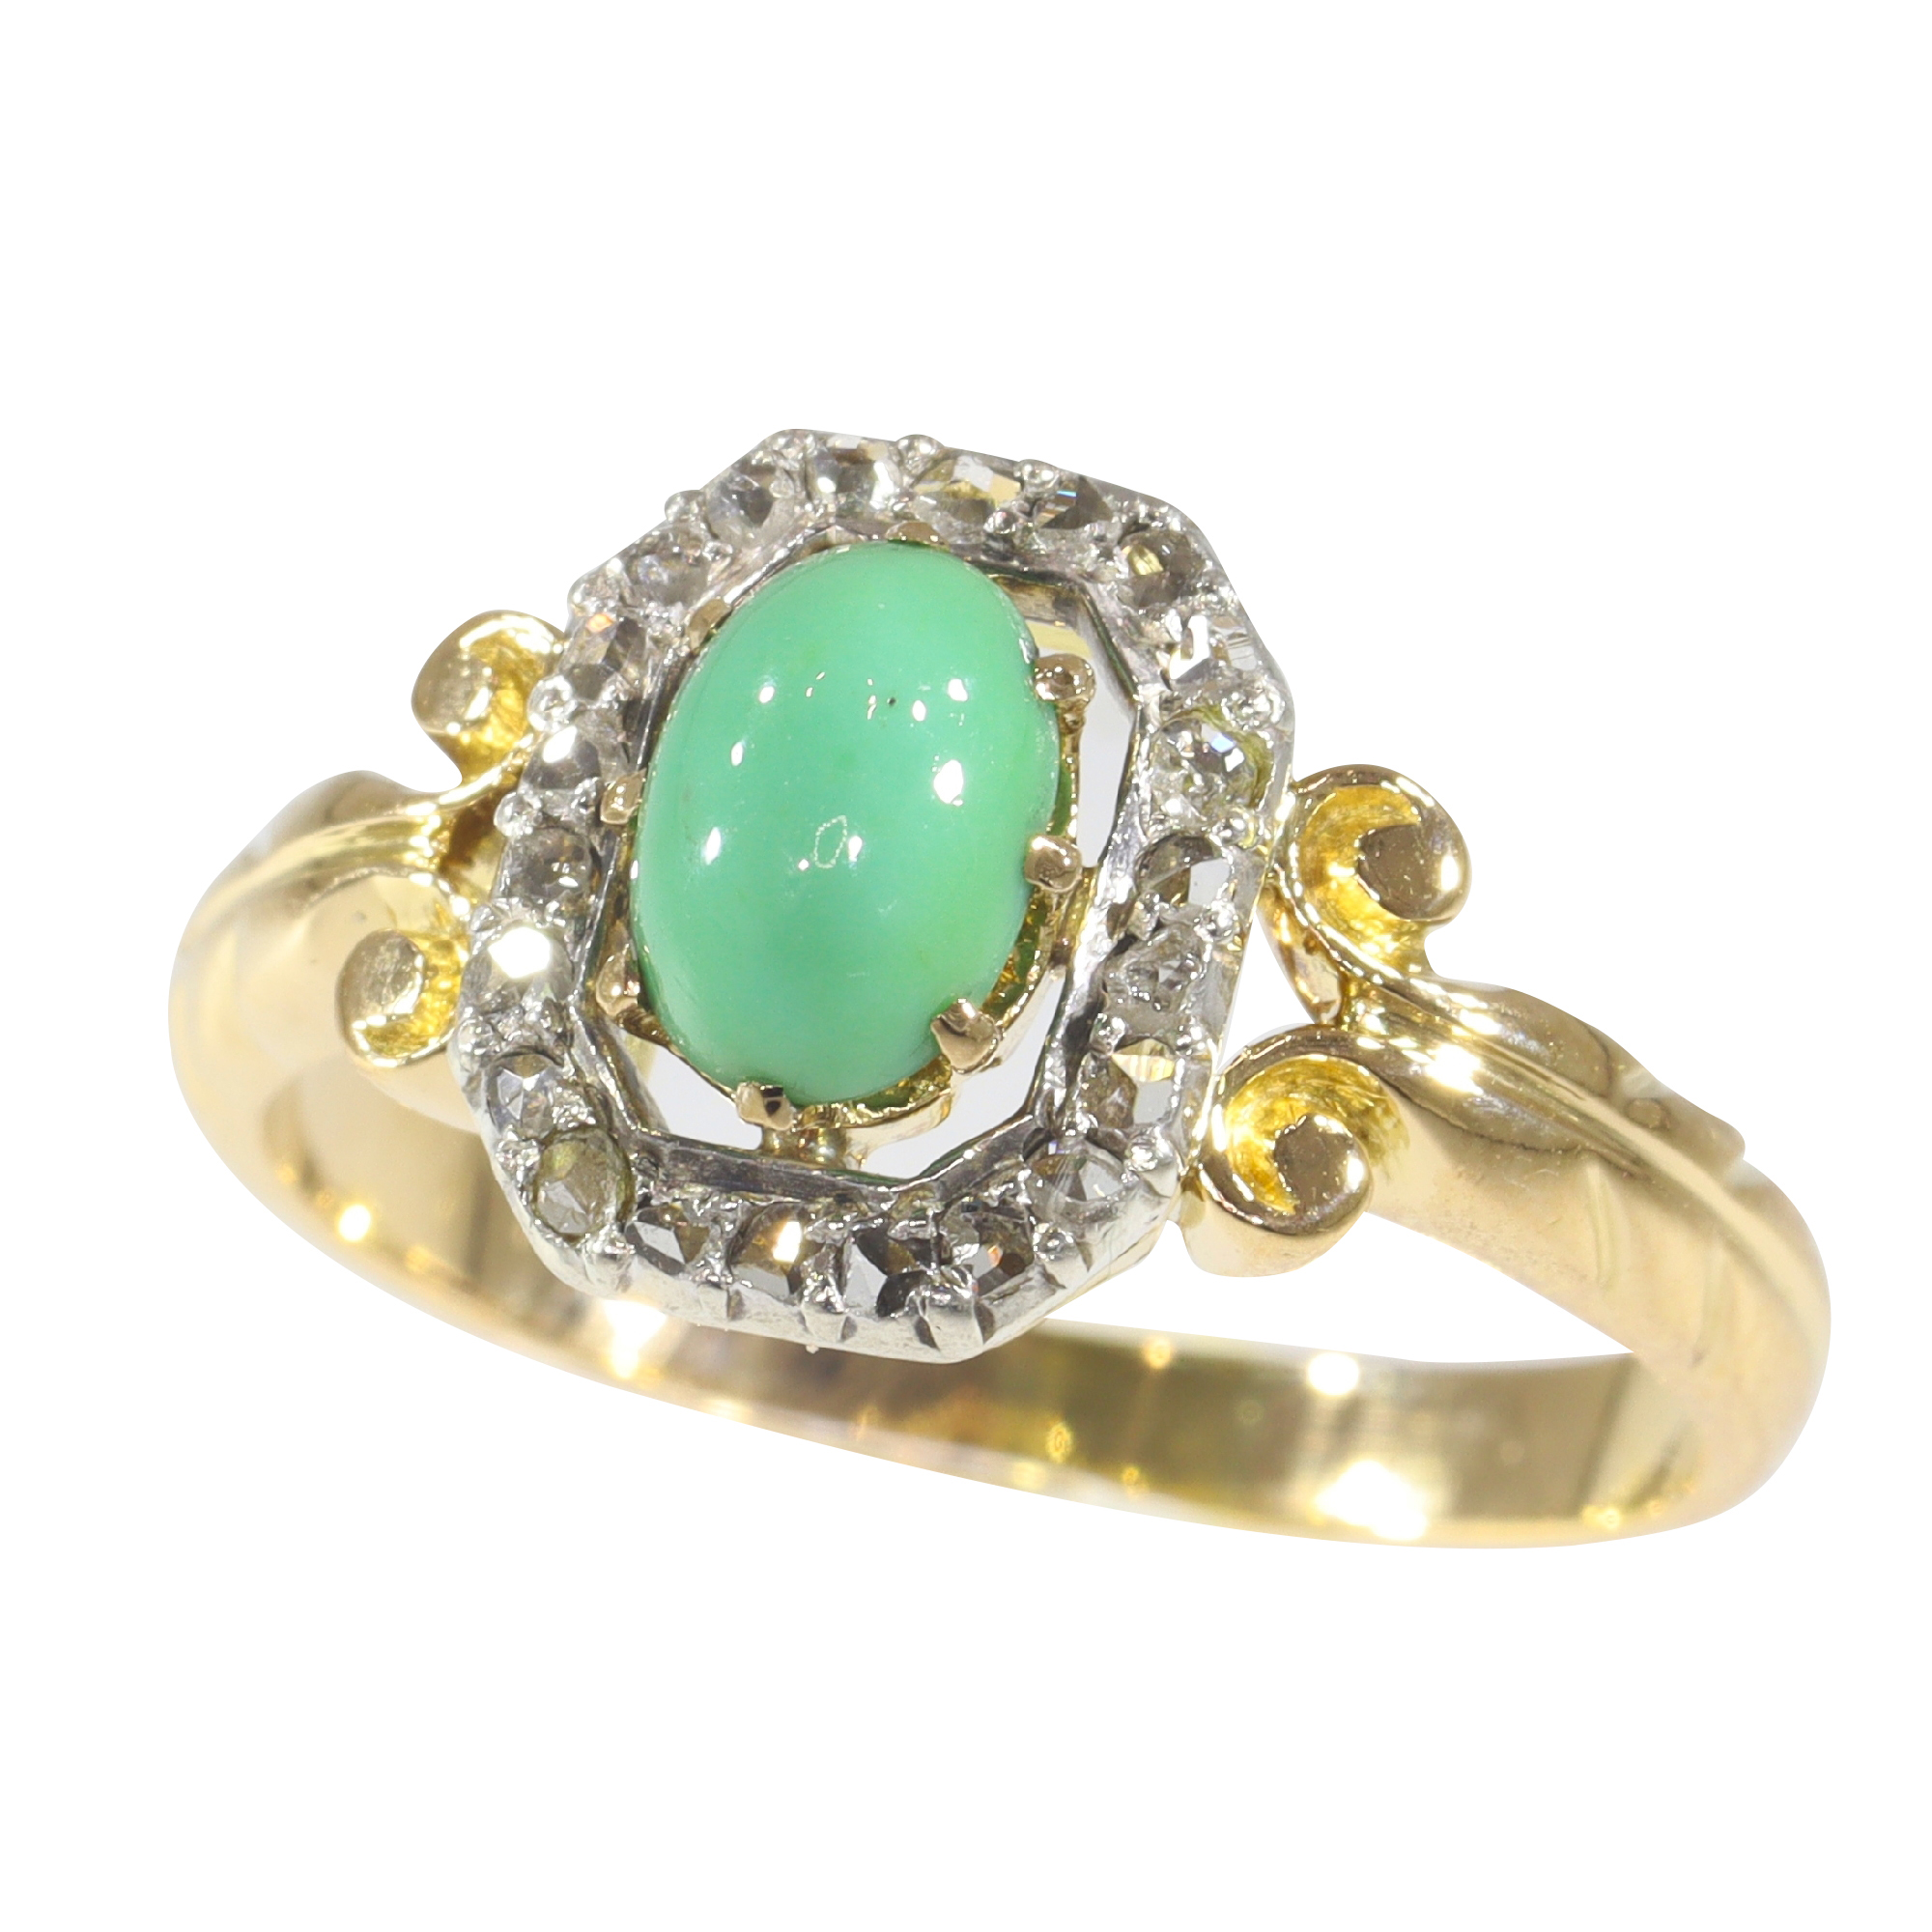 Antique Victorian 18K gold ring with rose cut diamonds and turquoise